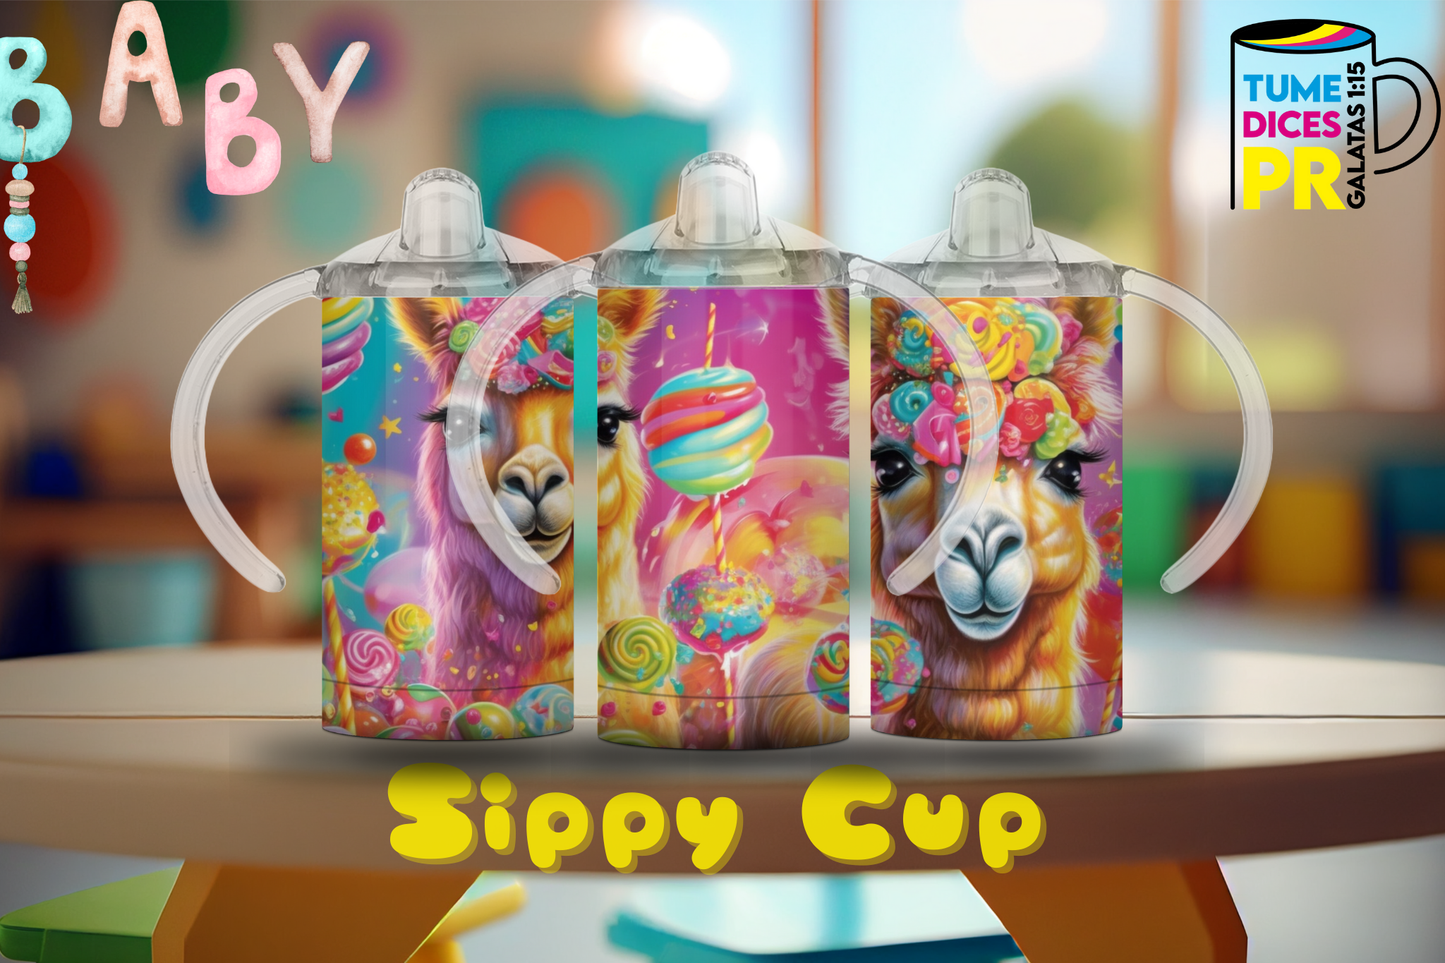 Sippy Cup 5